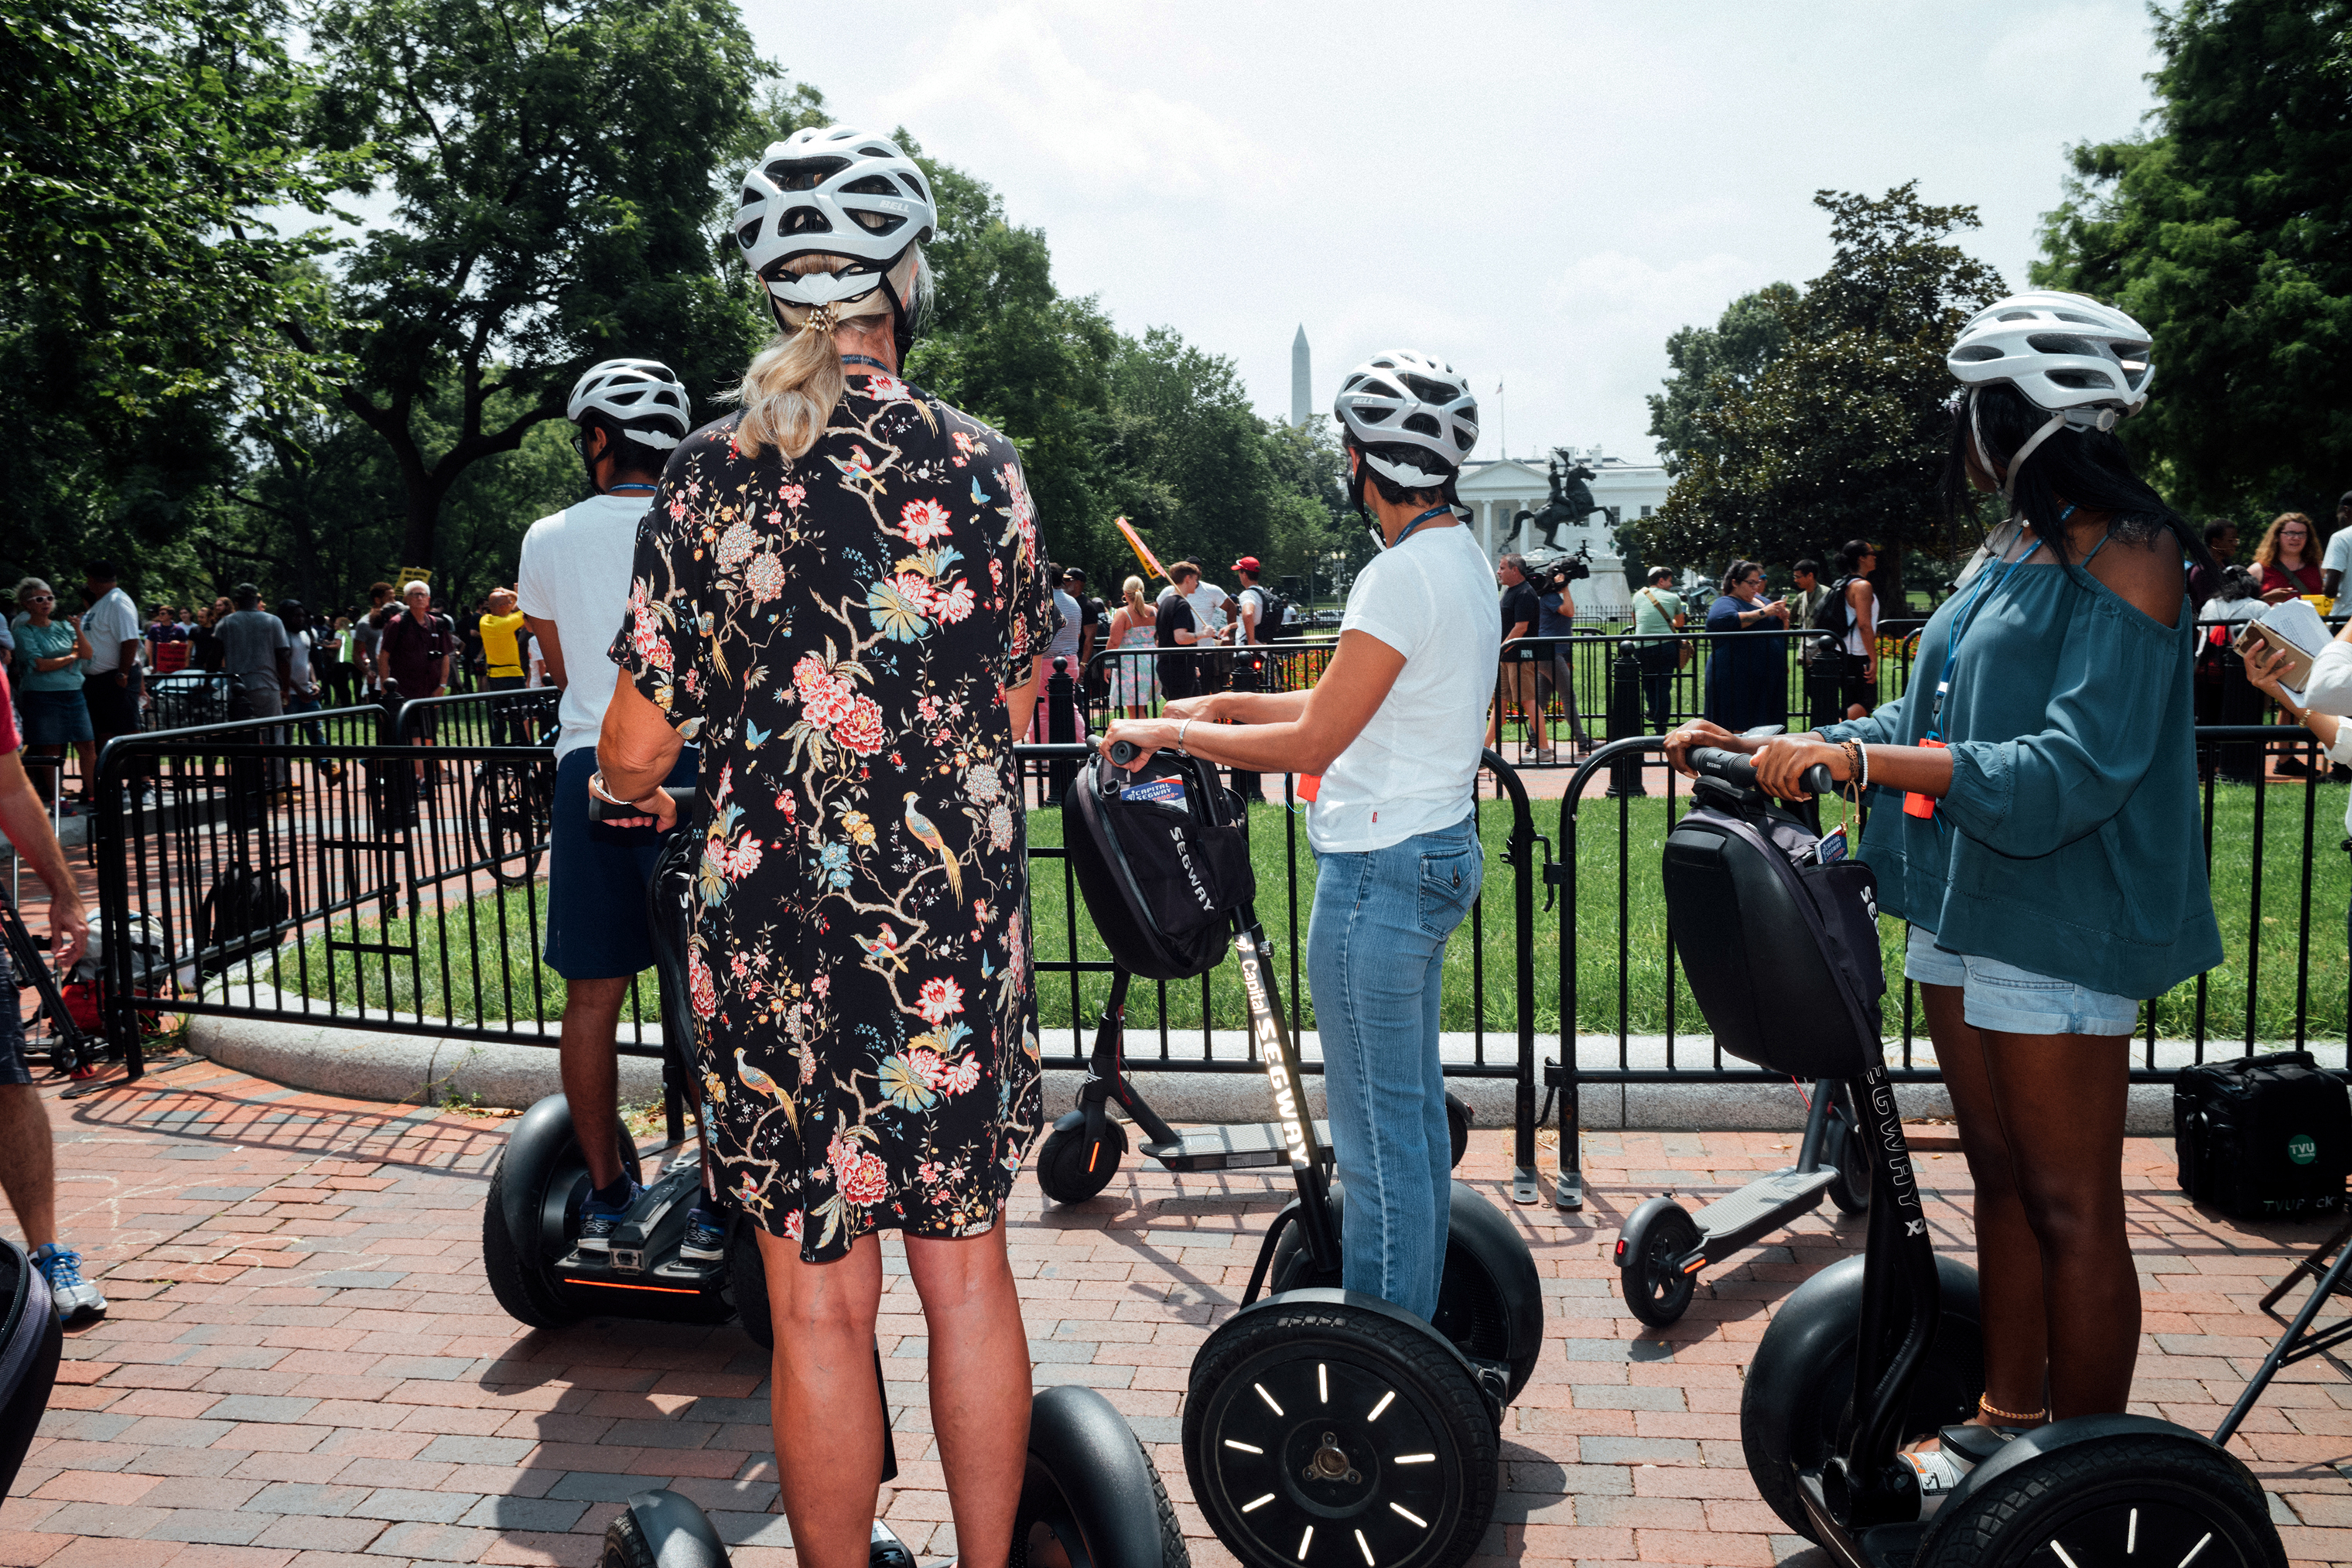 A group of passersby on scooters at Lafayette Square. (Daniel Arnold for TIME)